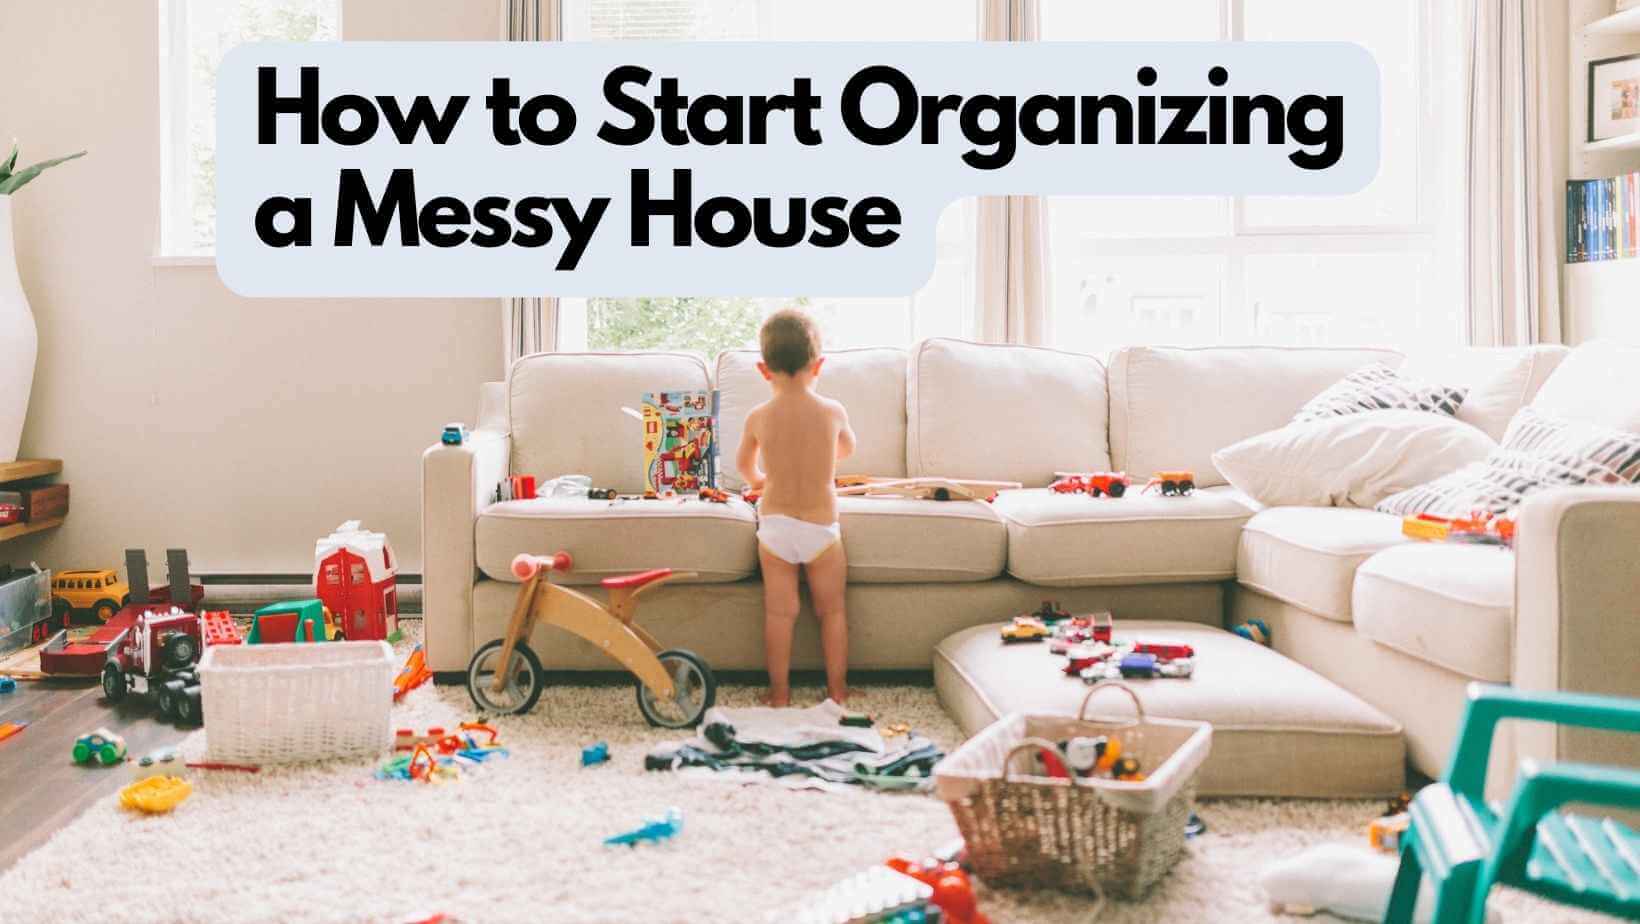 How to Start Organizing a Messy House.